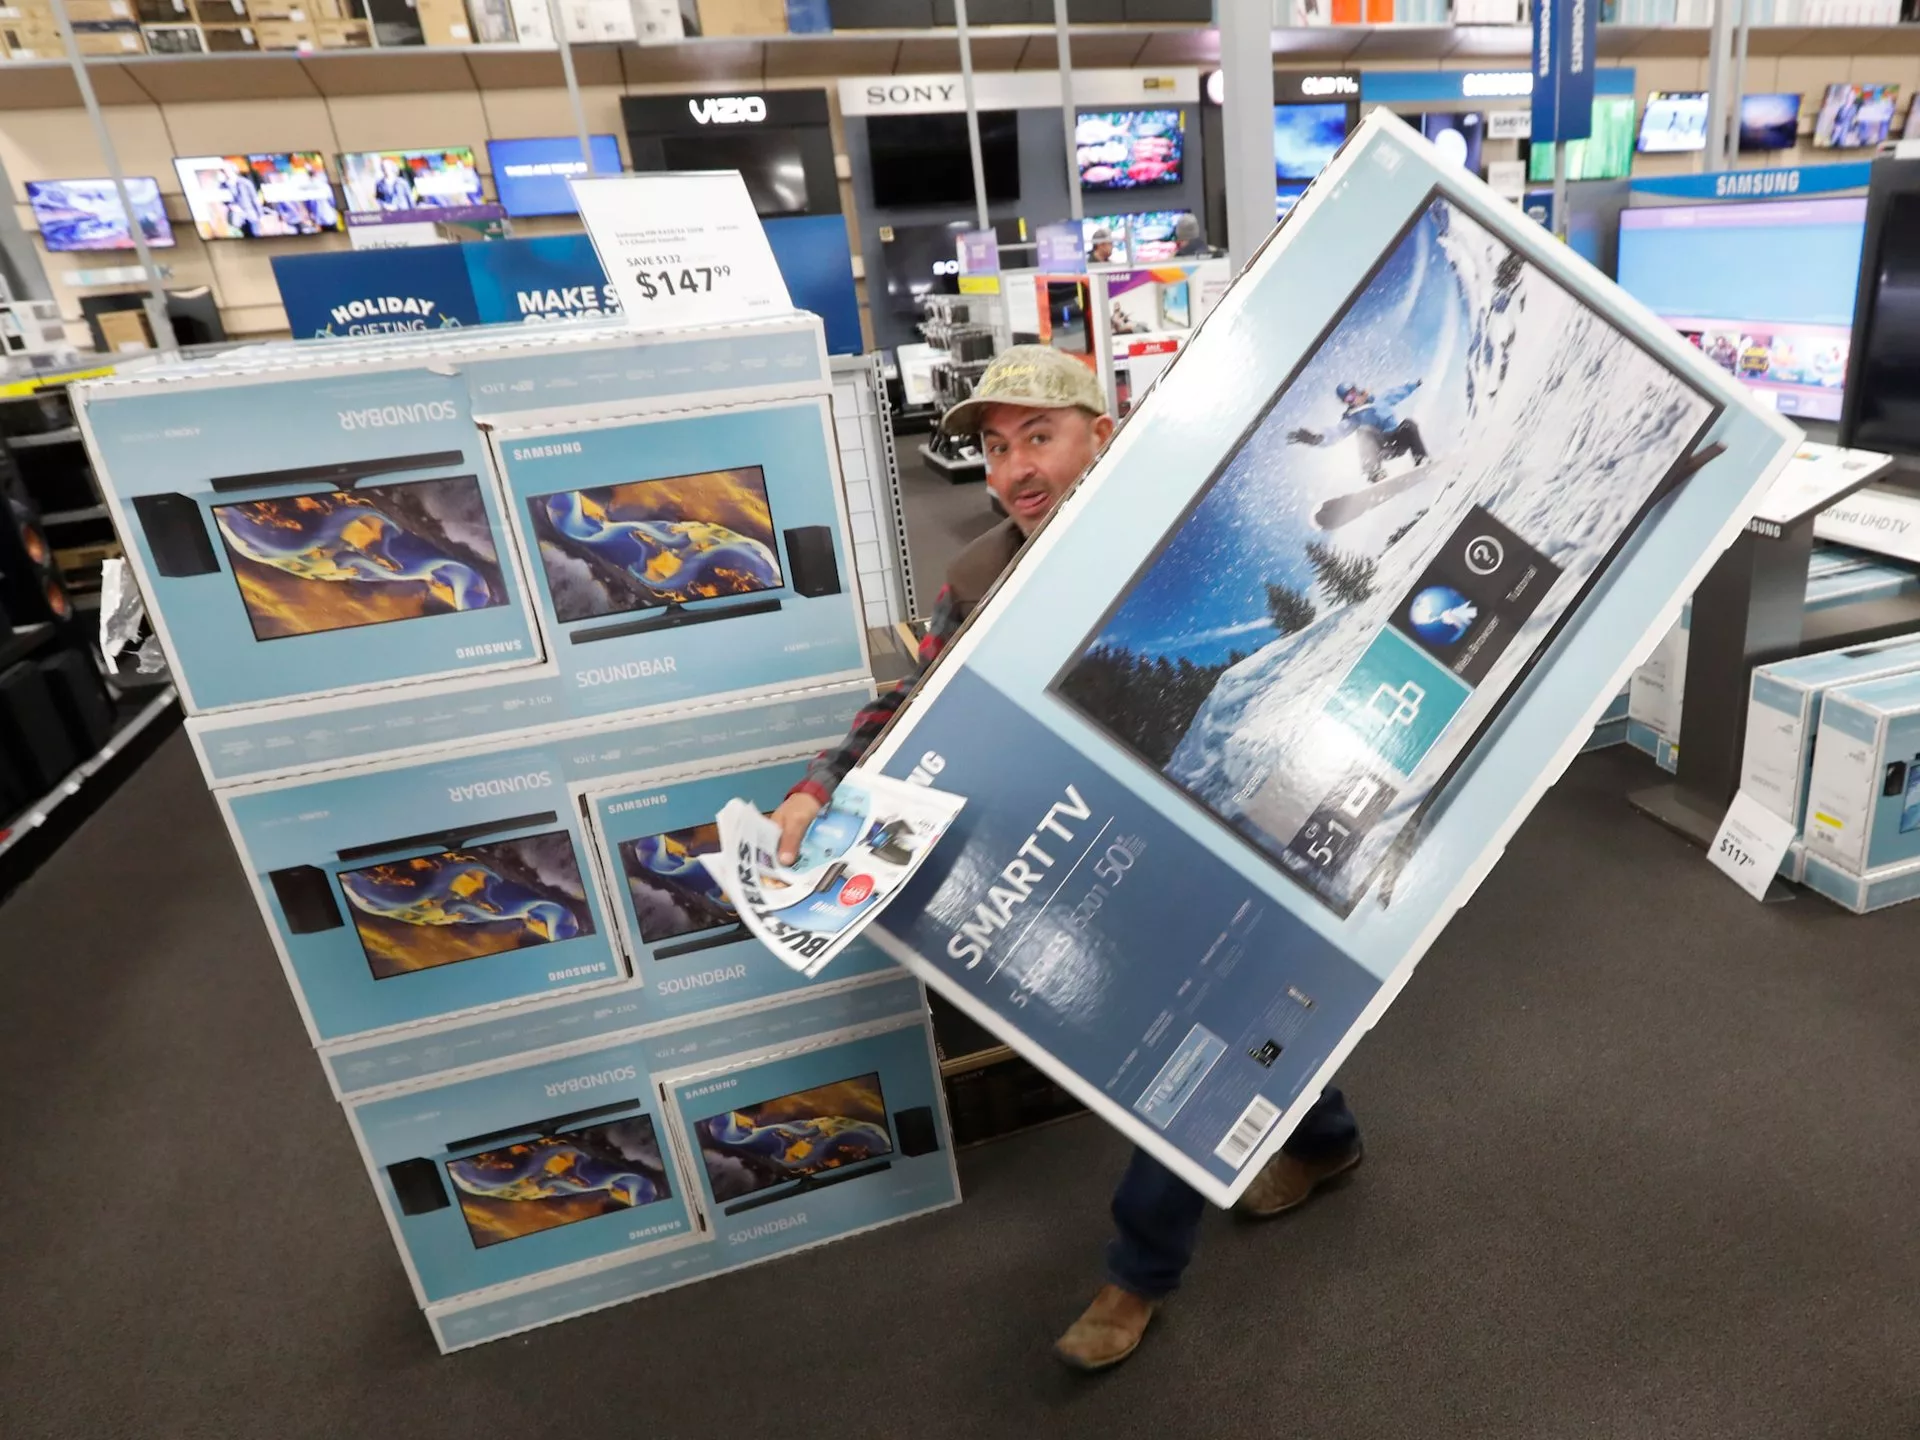 Man carrying large TV box in electronics store with TVs and soundbars on display